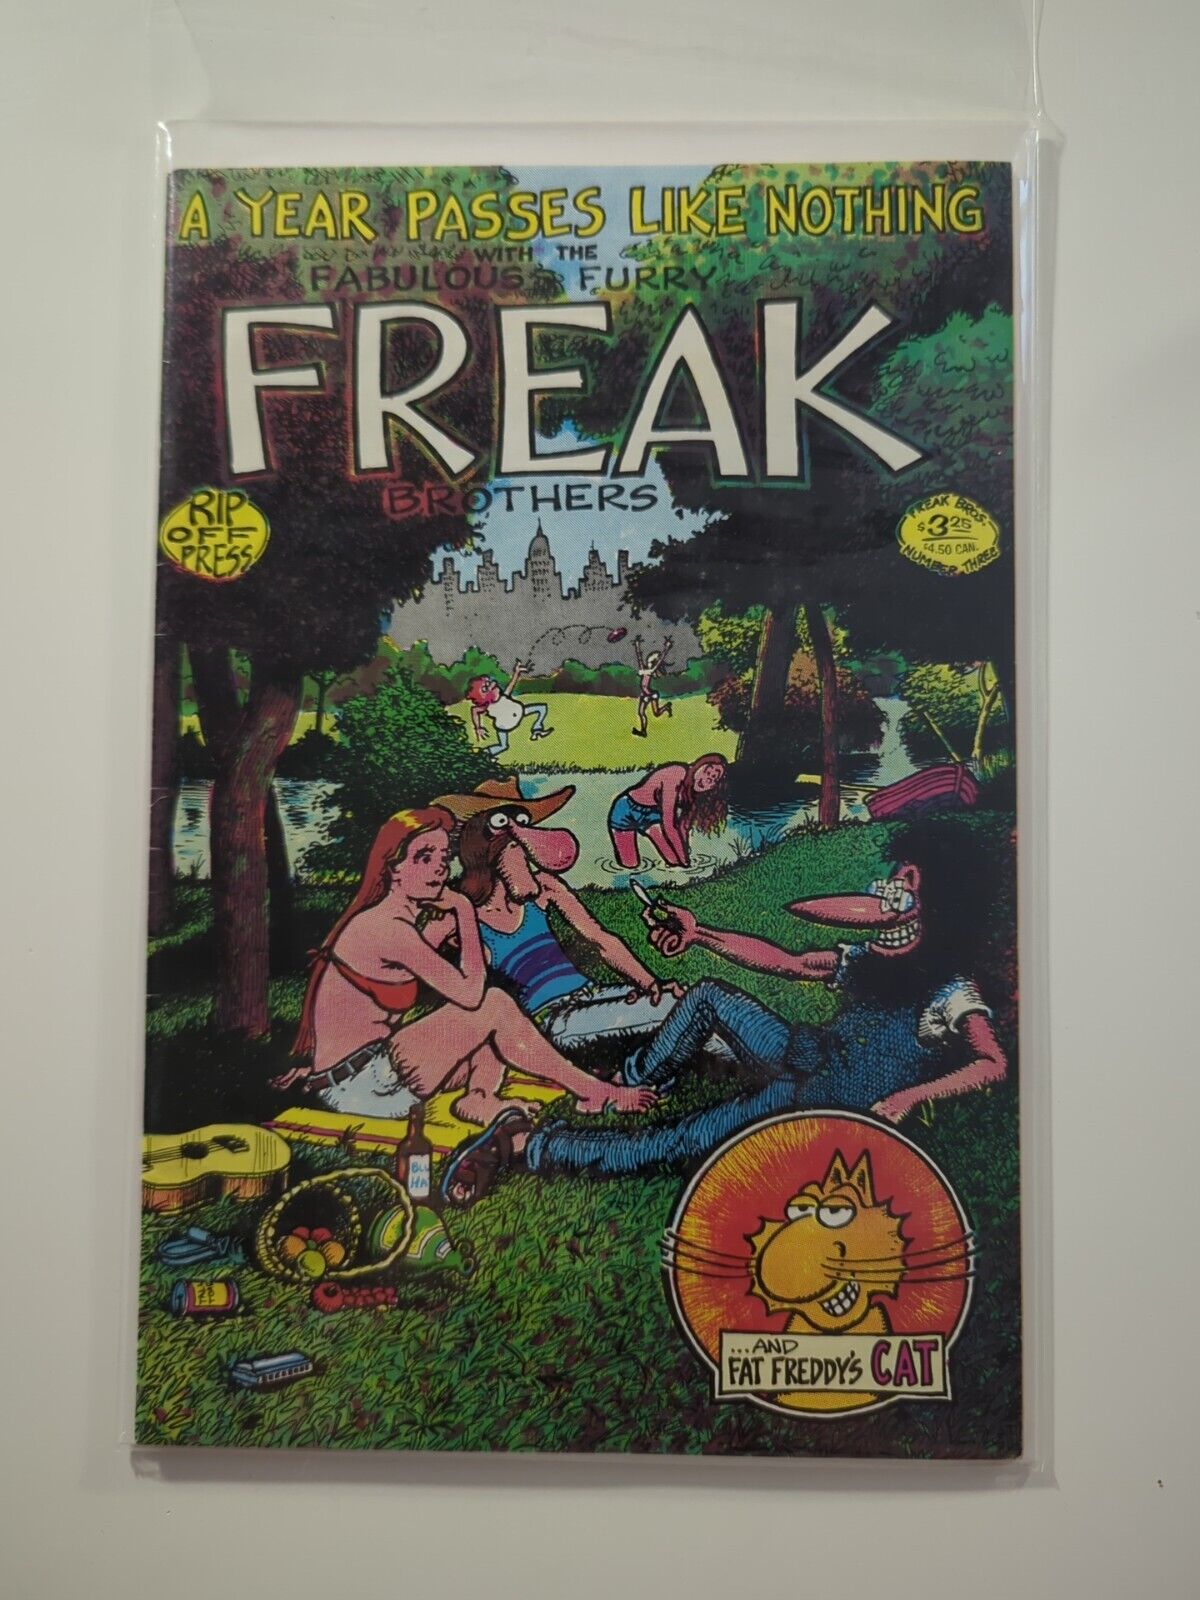 The Fabulous Furry Freak Brothers #3 (1973)